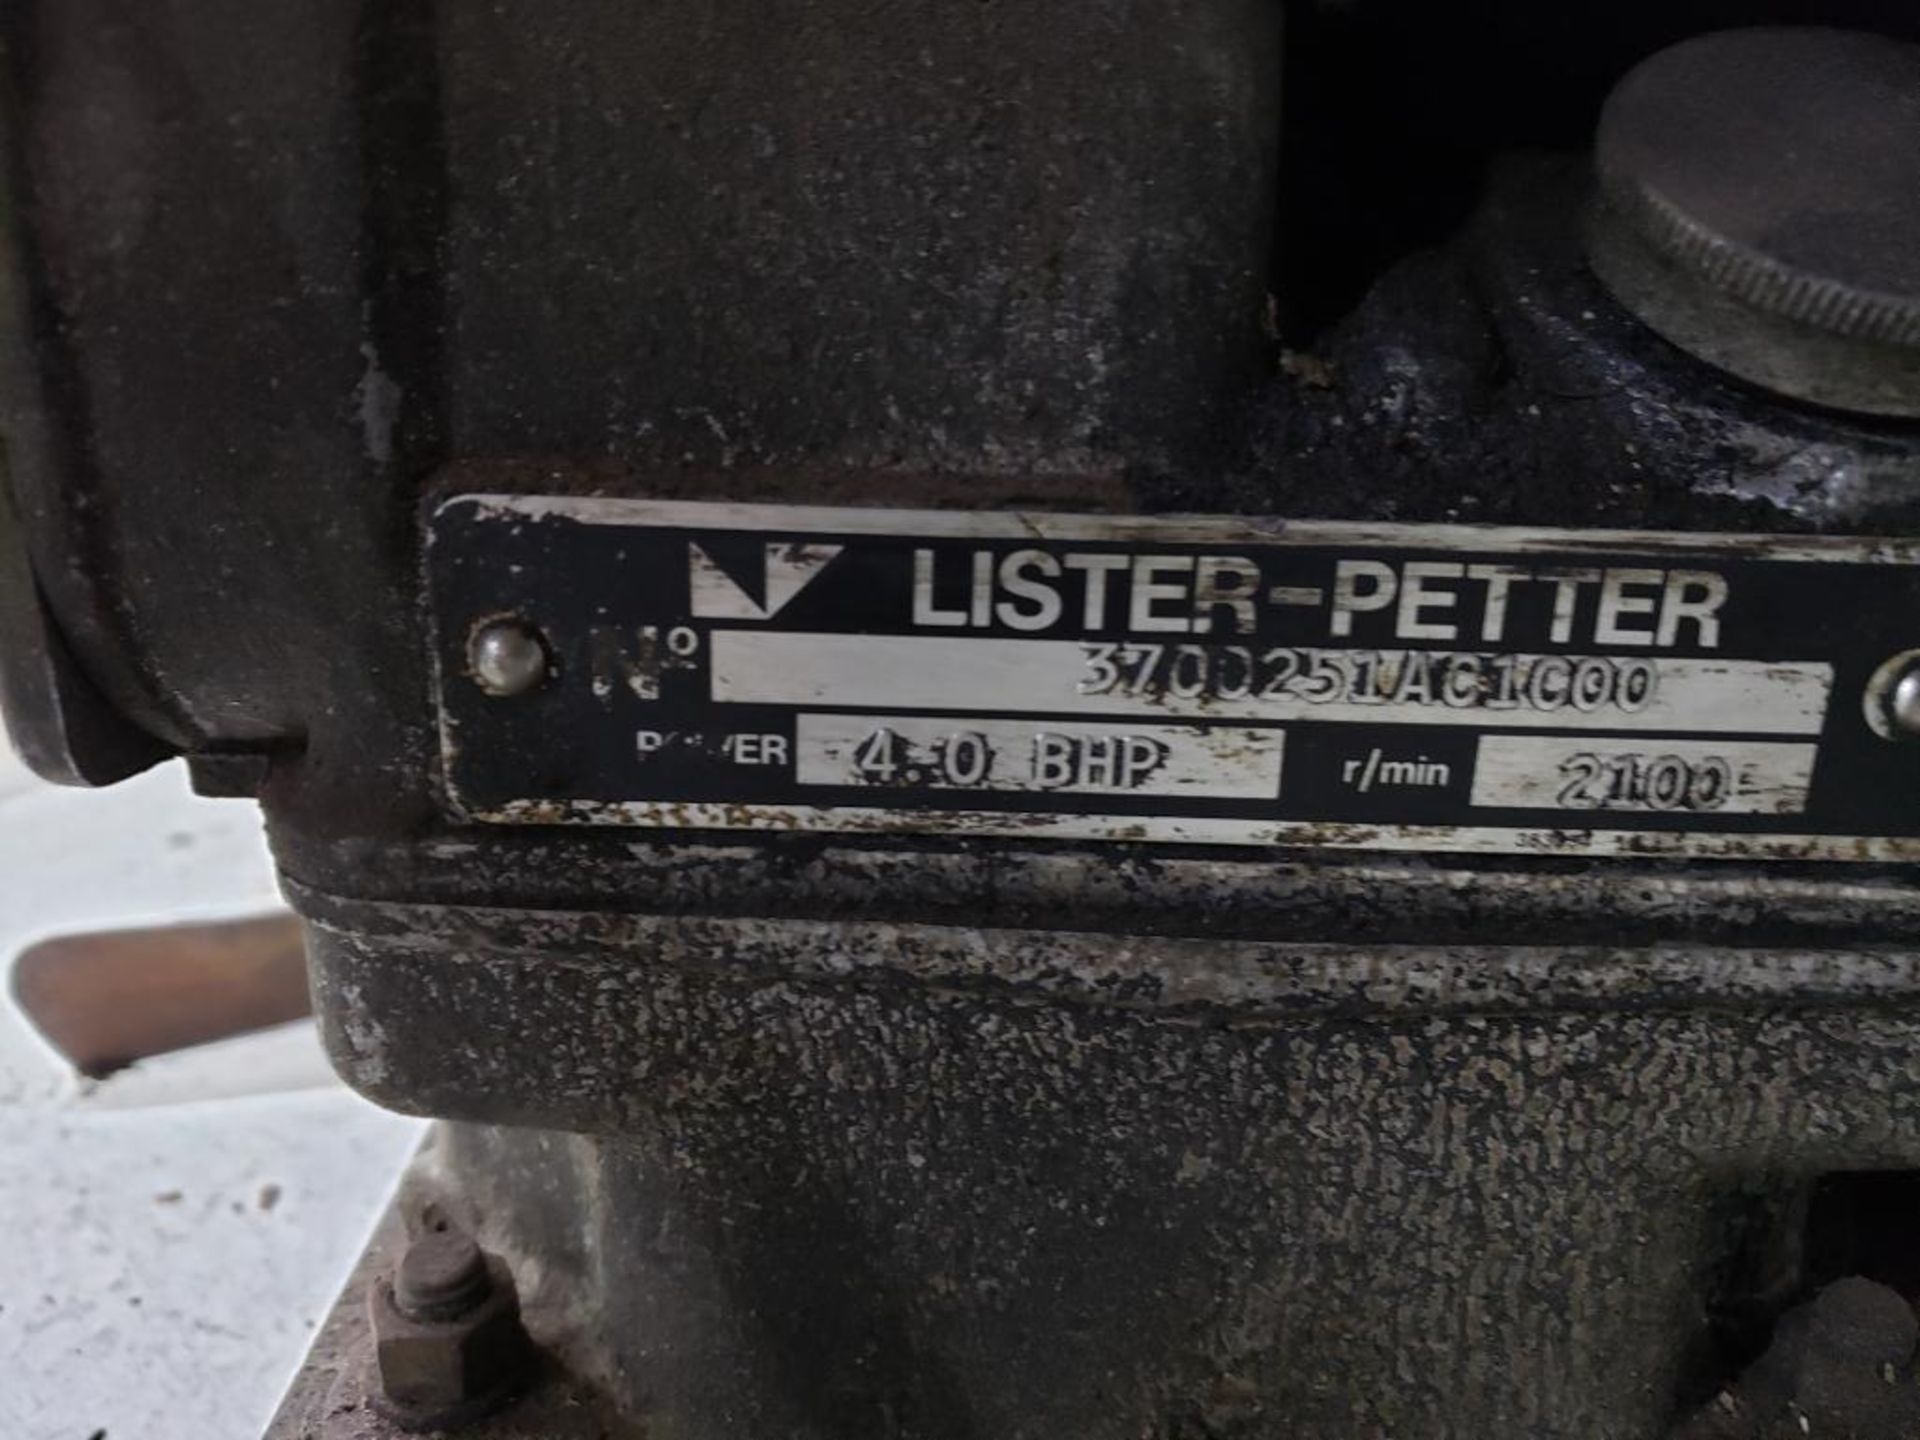 Lister-Petter 4hp engine. - Image 6 of 6